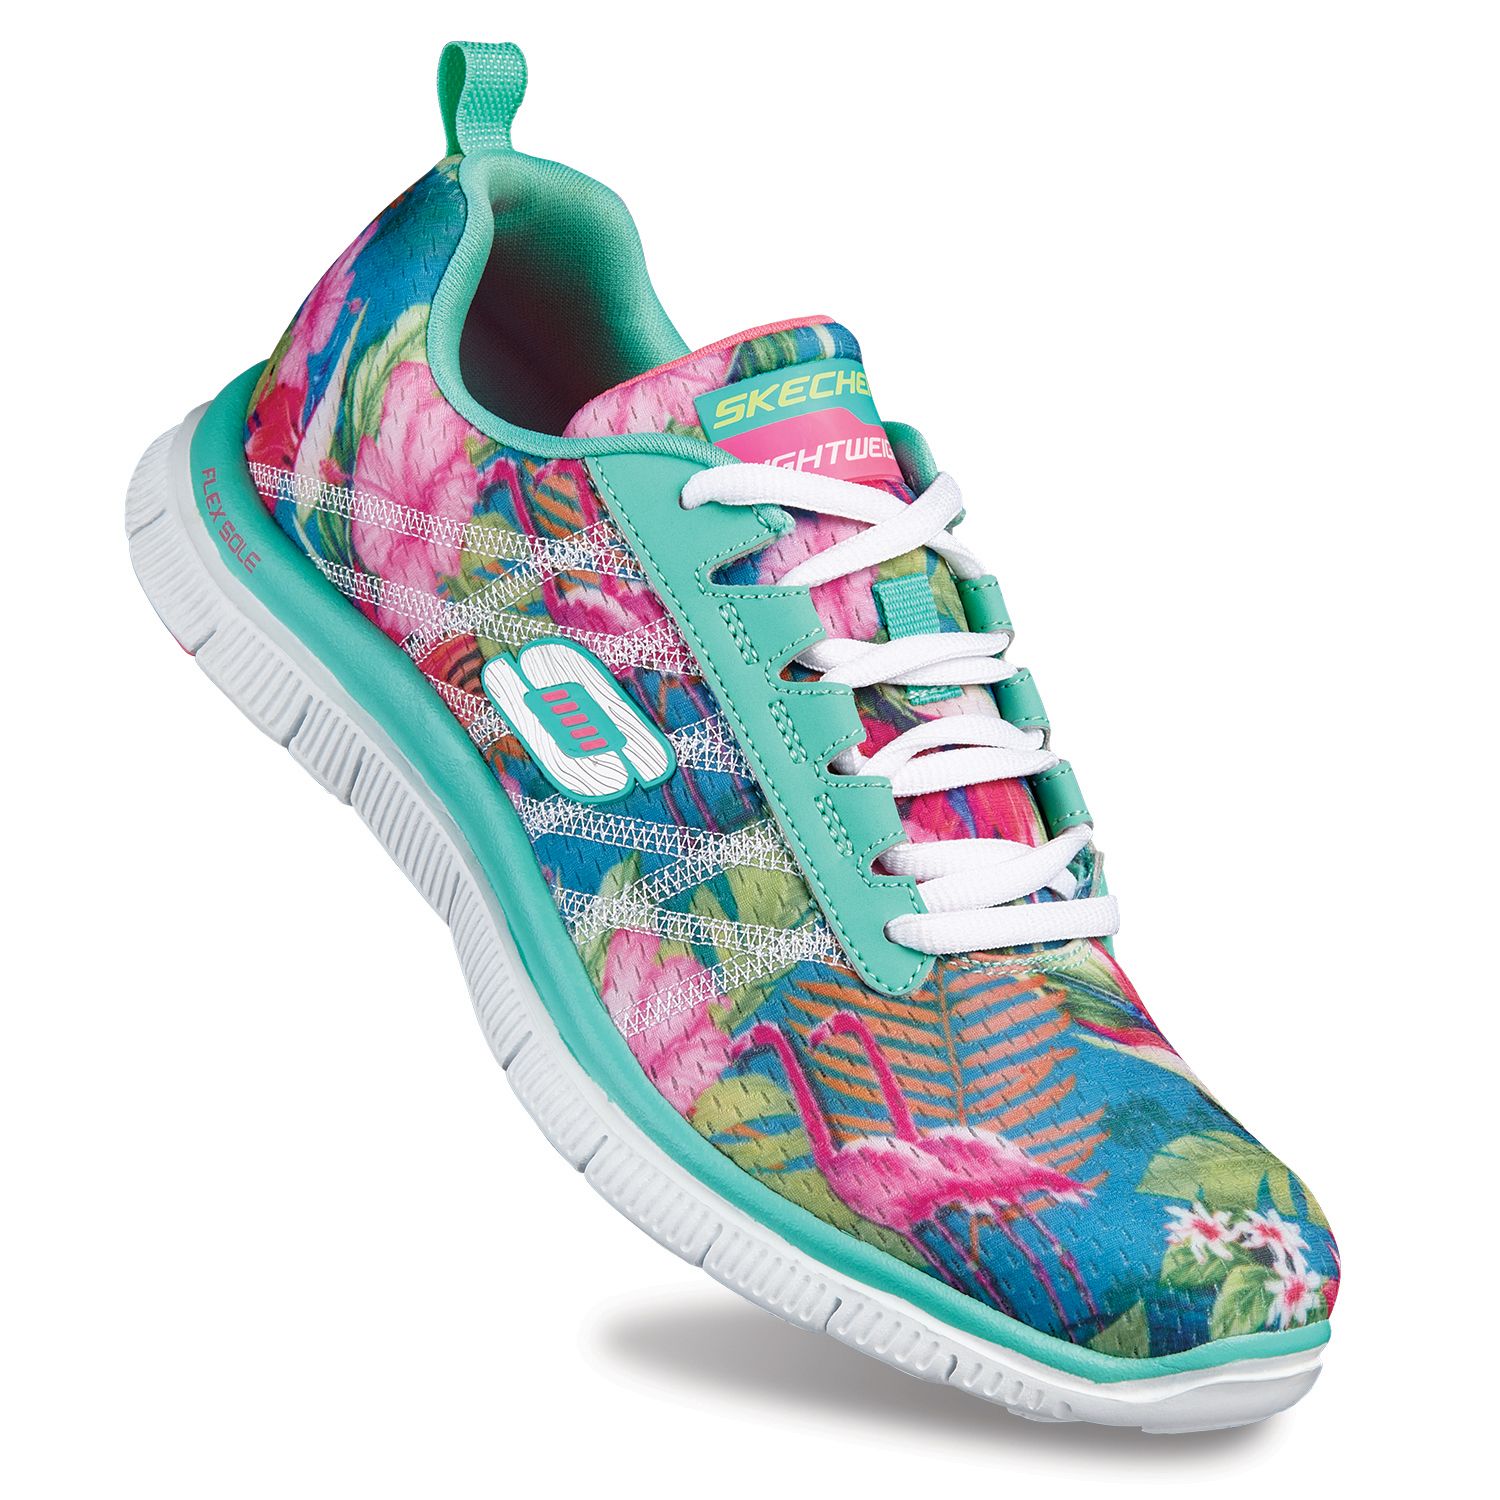 sketchers with flowers